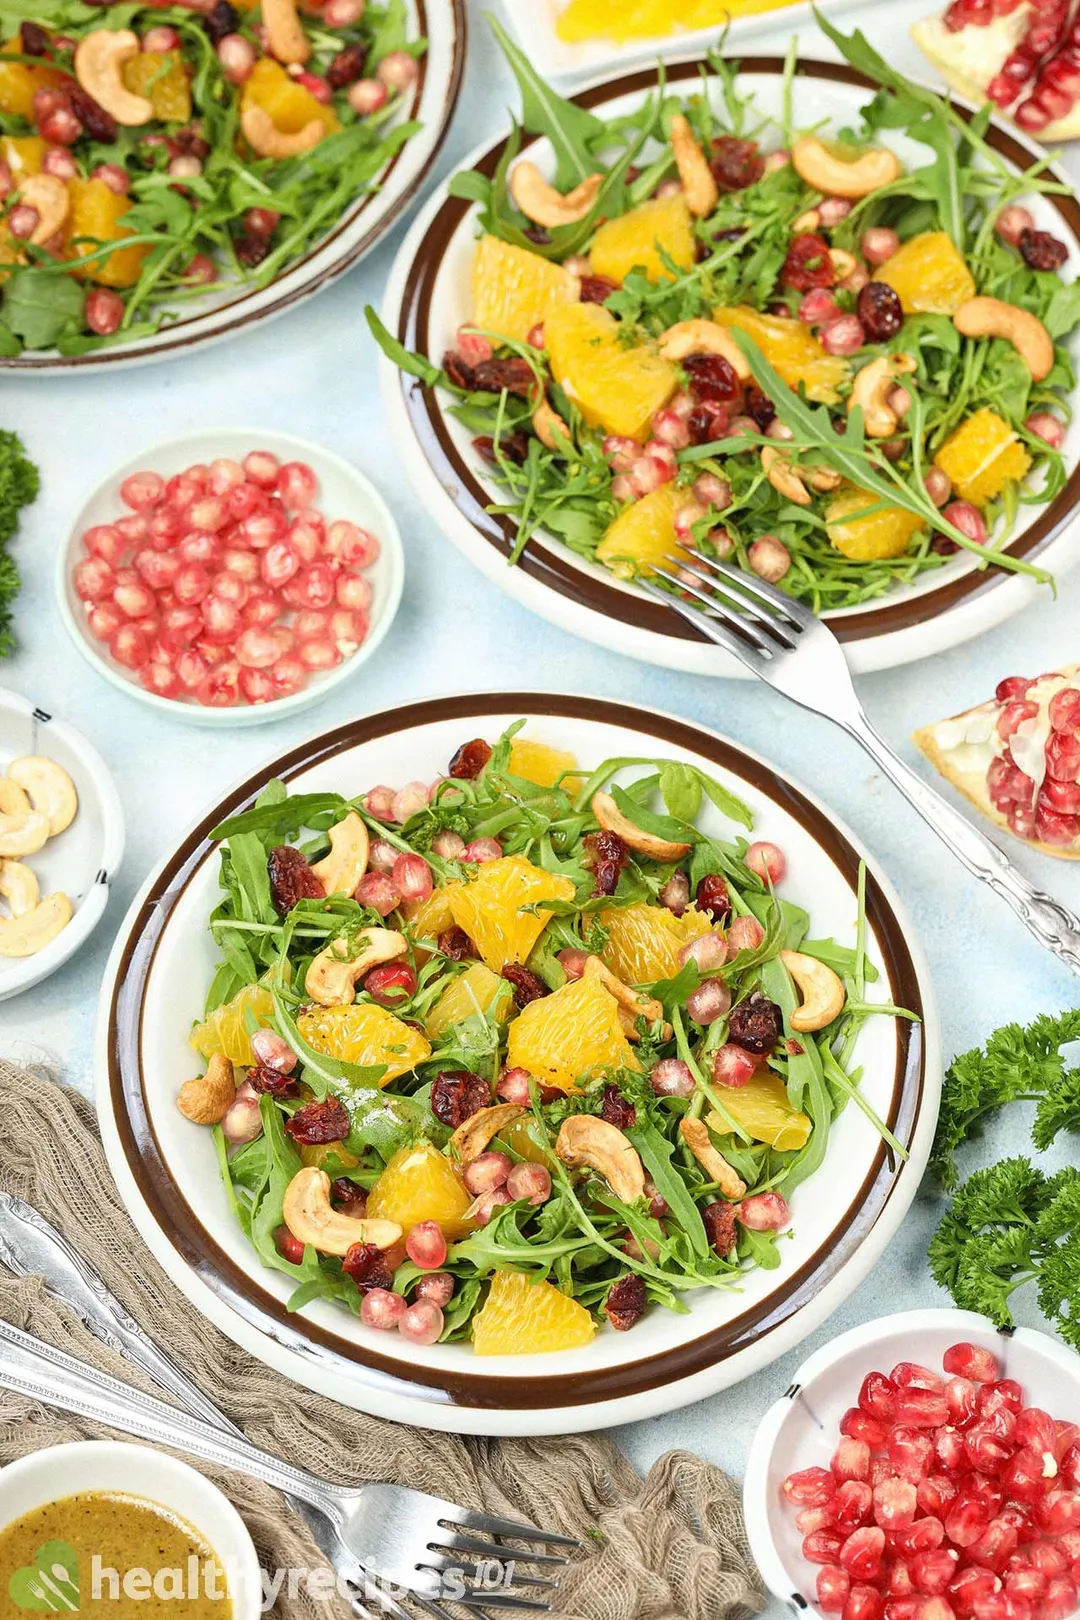 Two plates of Arugula Salad placed near forks and plates of pomegranate seeds.